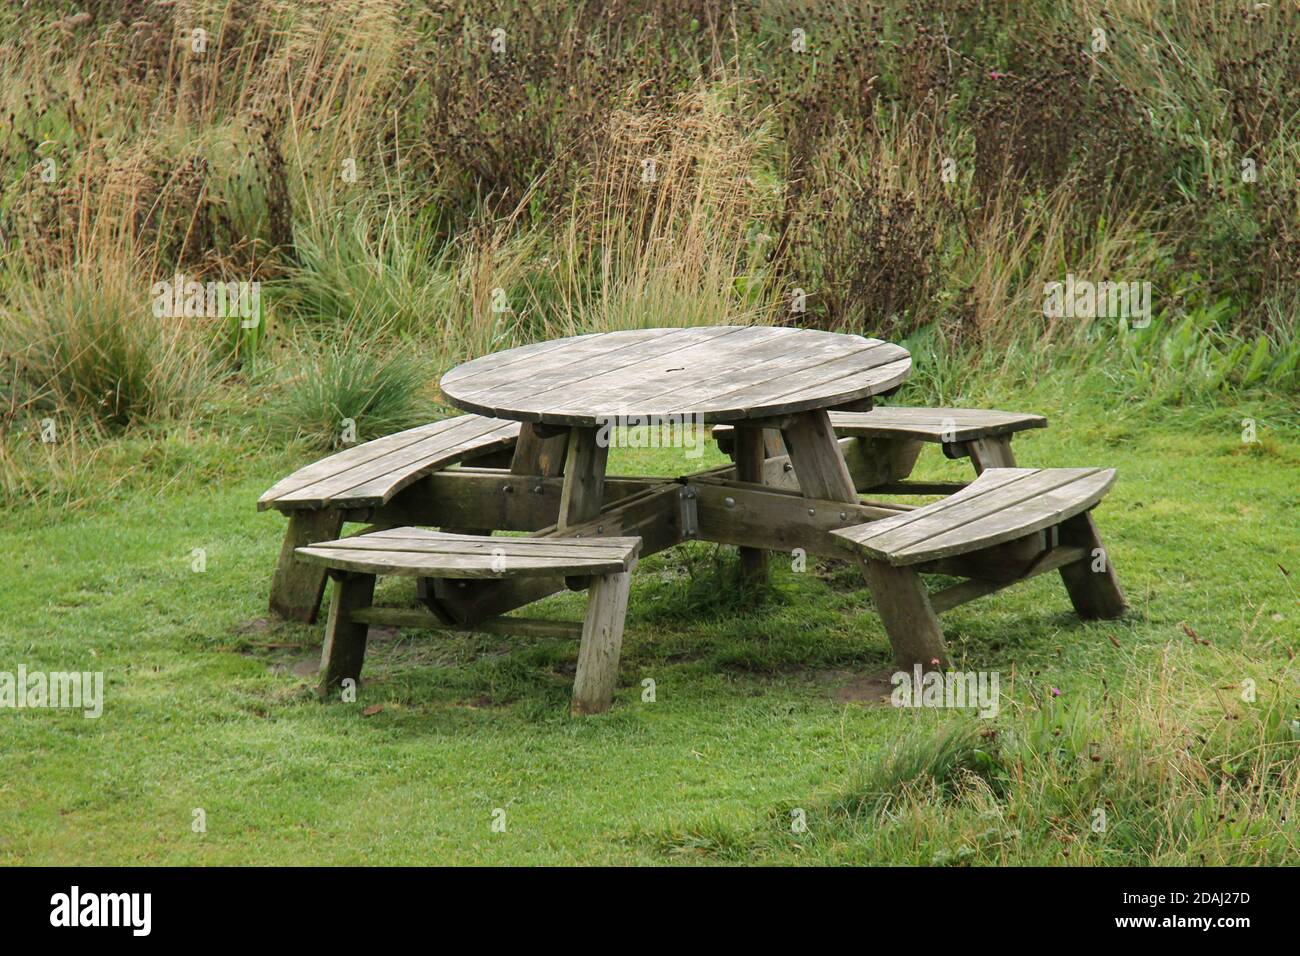 A Round Wooden Outdoor Picnic Table with Seats Stock Photo - Alamy